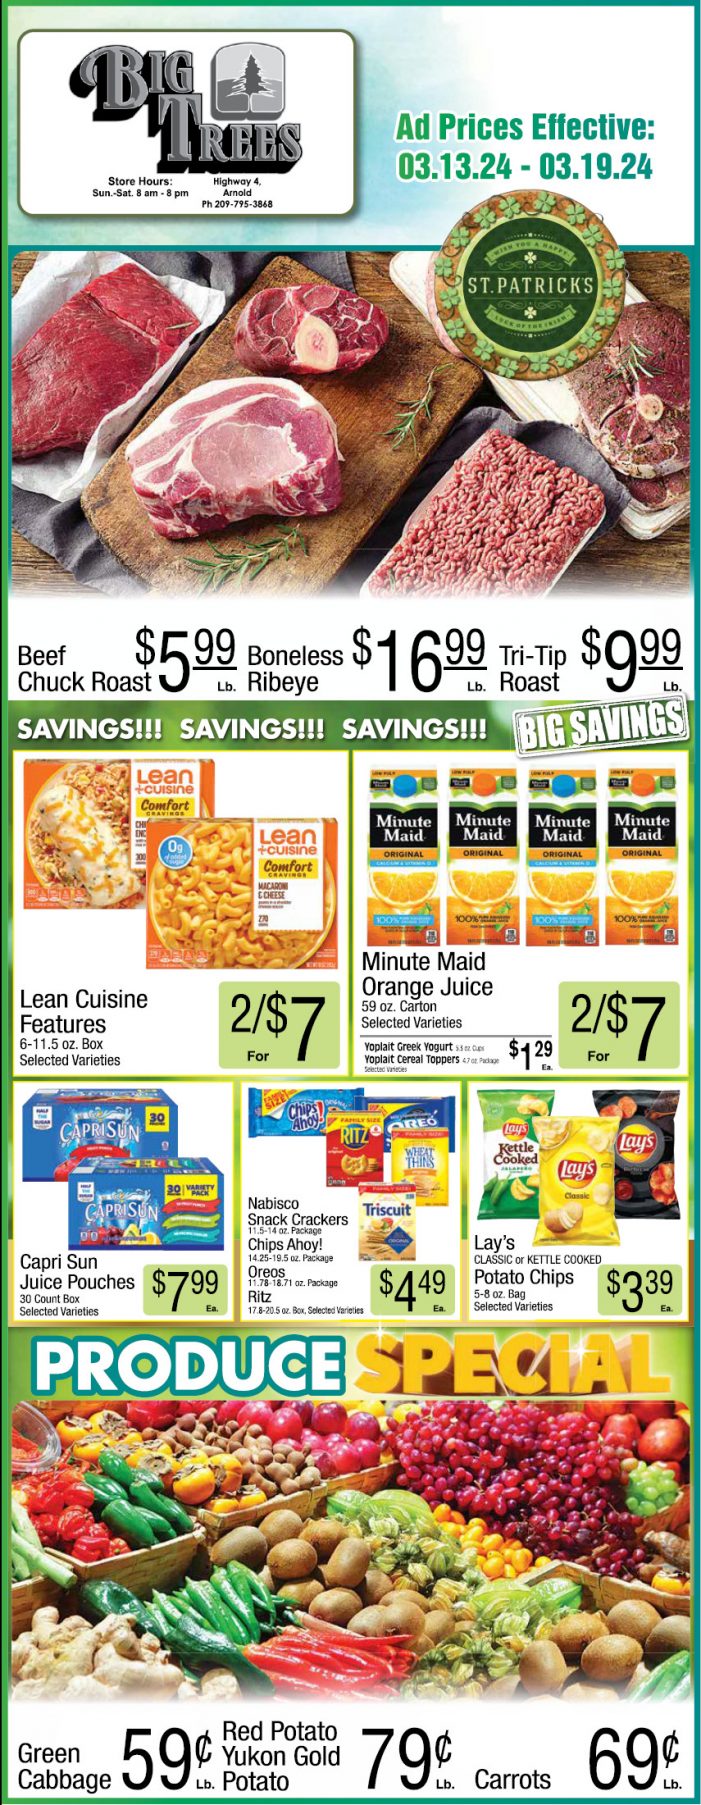 Big Trees Market Weekly Ad, Grocery, Produce, Meat & Deli Specials Through March 19th! Shop Local & Save!